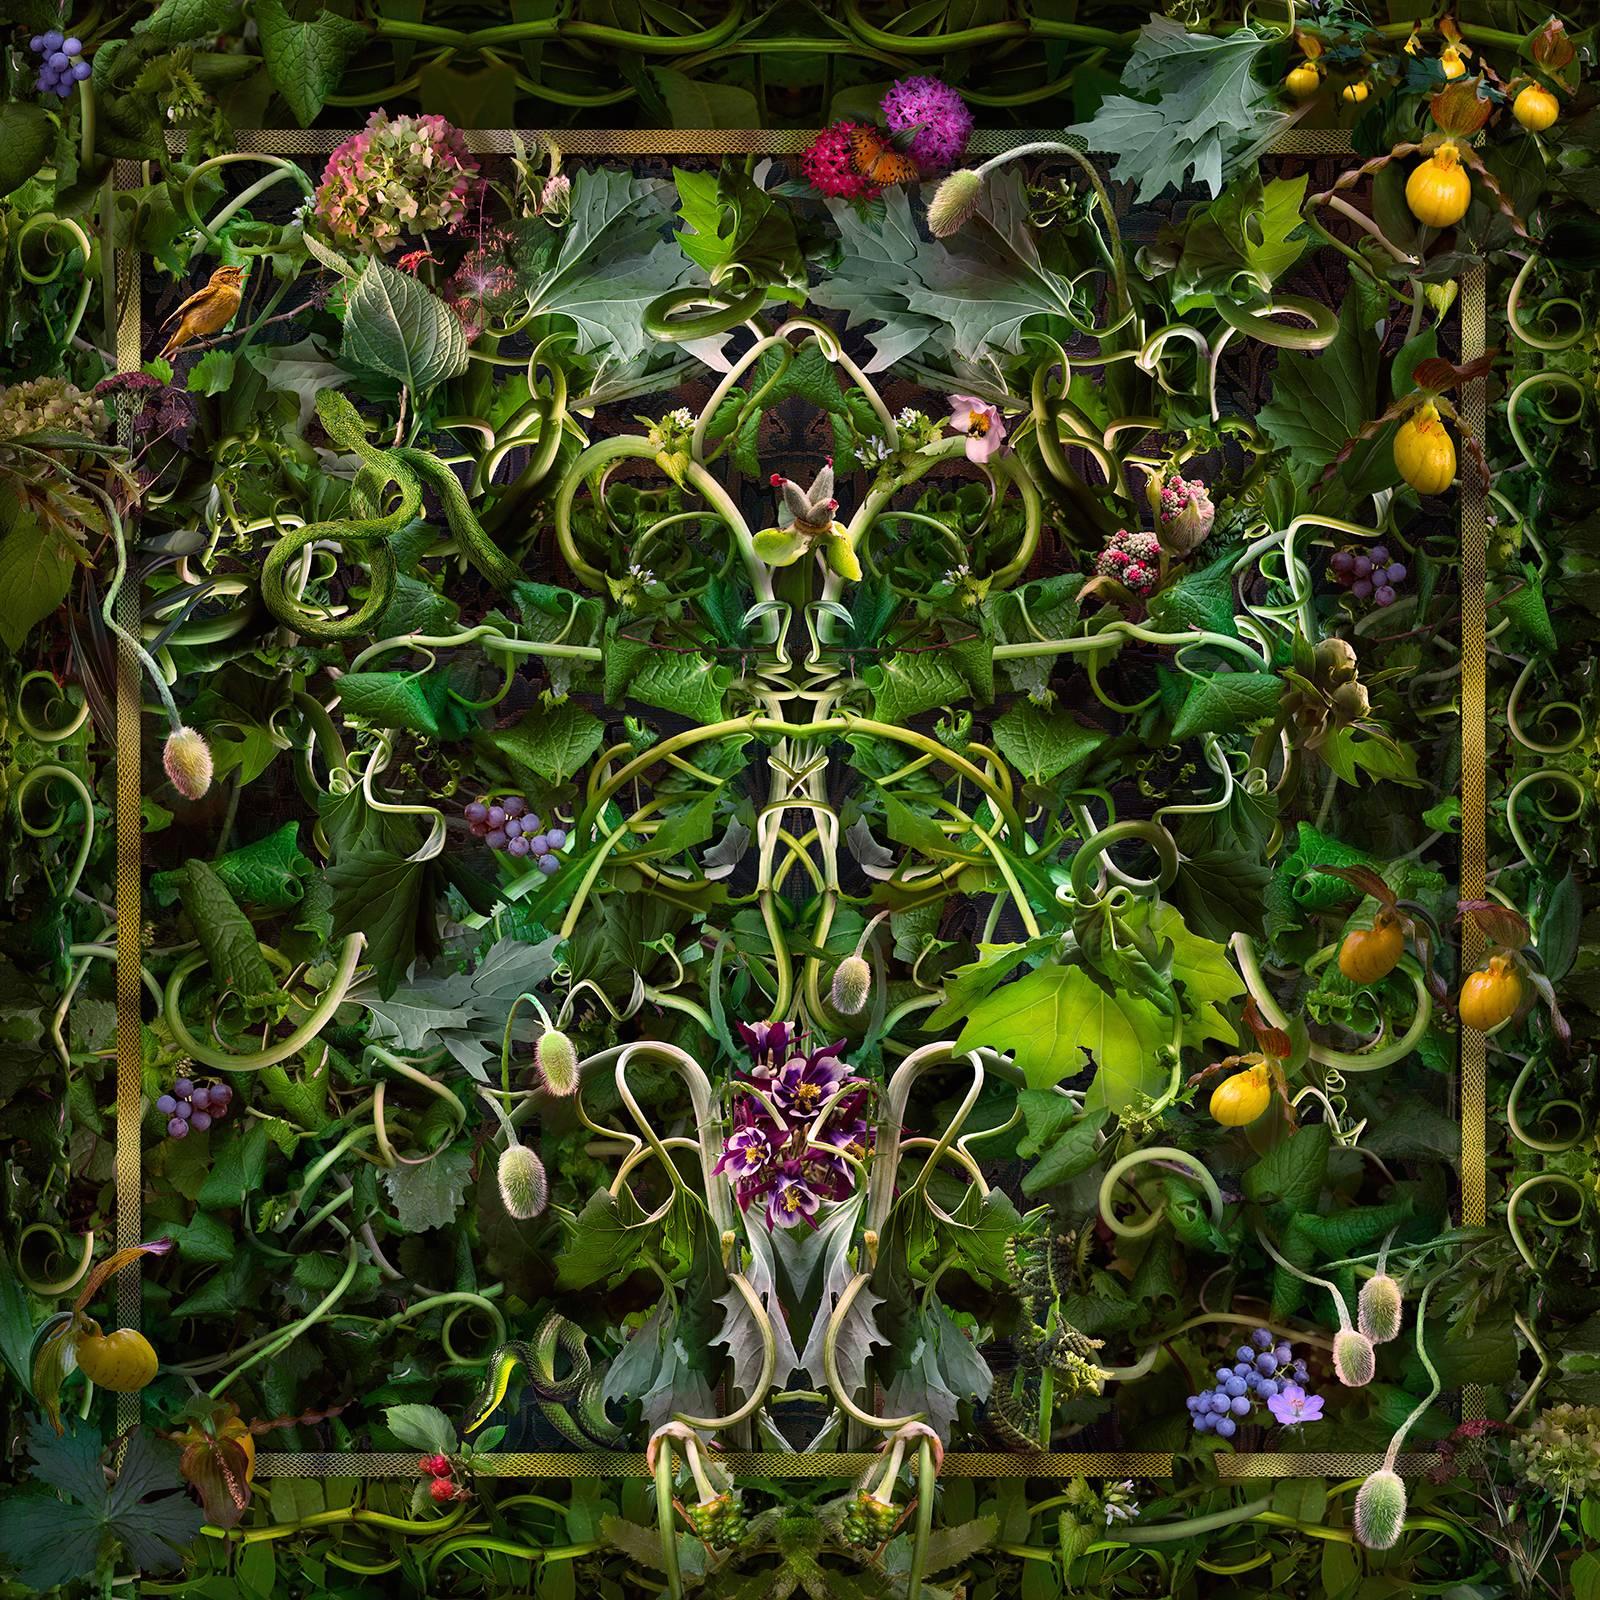 Lisa A. Frank Color Photograph - Feared, Loved, Botanical Still Life Photograph with Green Leaves, Birds, Fruits